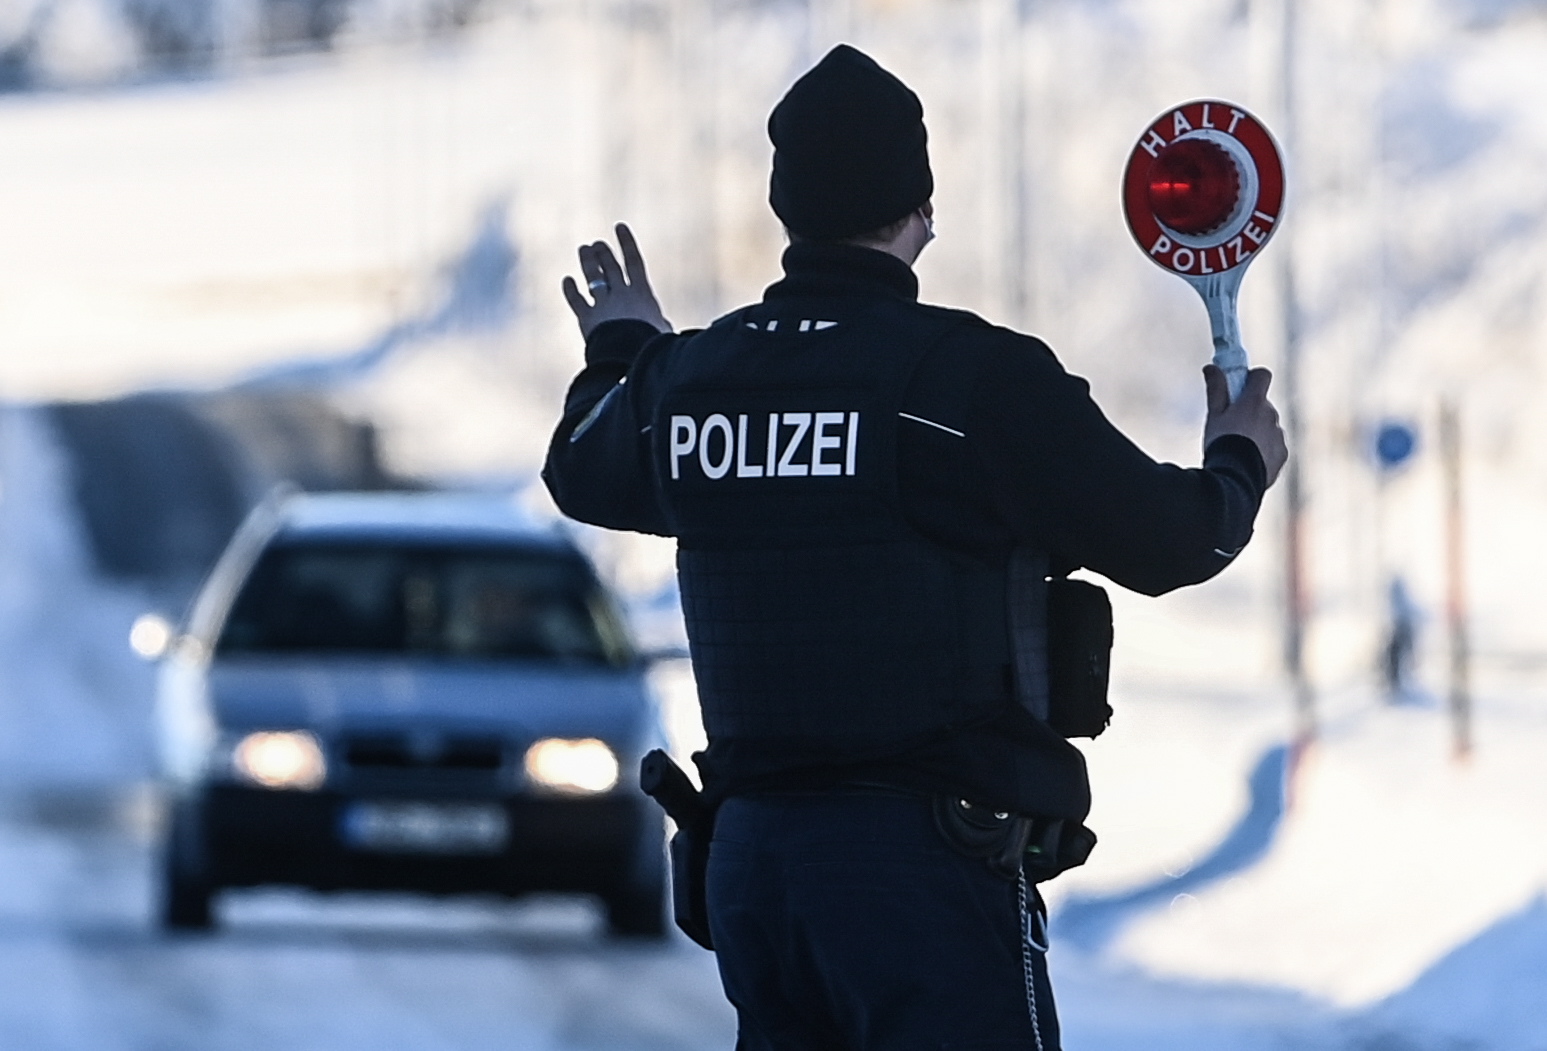 epa09011283 A member of the German Federal Police stops a car at the border crossing in Zinnwald, on the Germany-Czech Republic border, 14 February 2021. Germany reinstated temporary entry bans and border controls from Czech Republic due to growing numbers of coronavirus variant cases in the Czech country. Starting from 14 February, stricter entry rules apply to the German border with the Czech Republic and the Austrian state of Tyrol.  EPA/FILIP SINGER